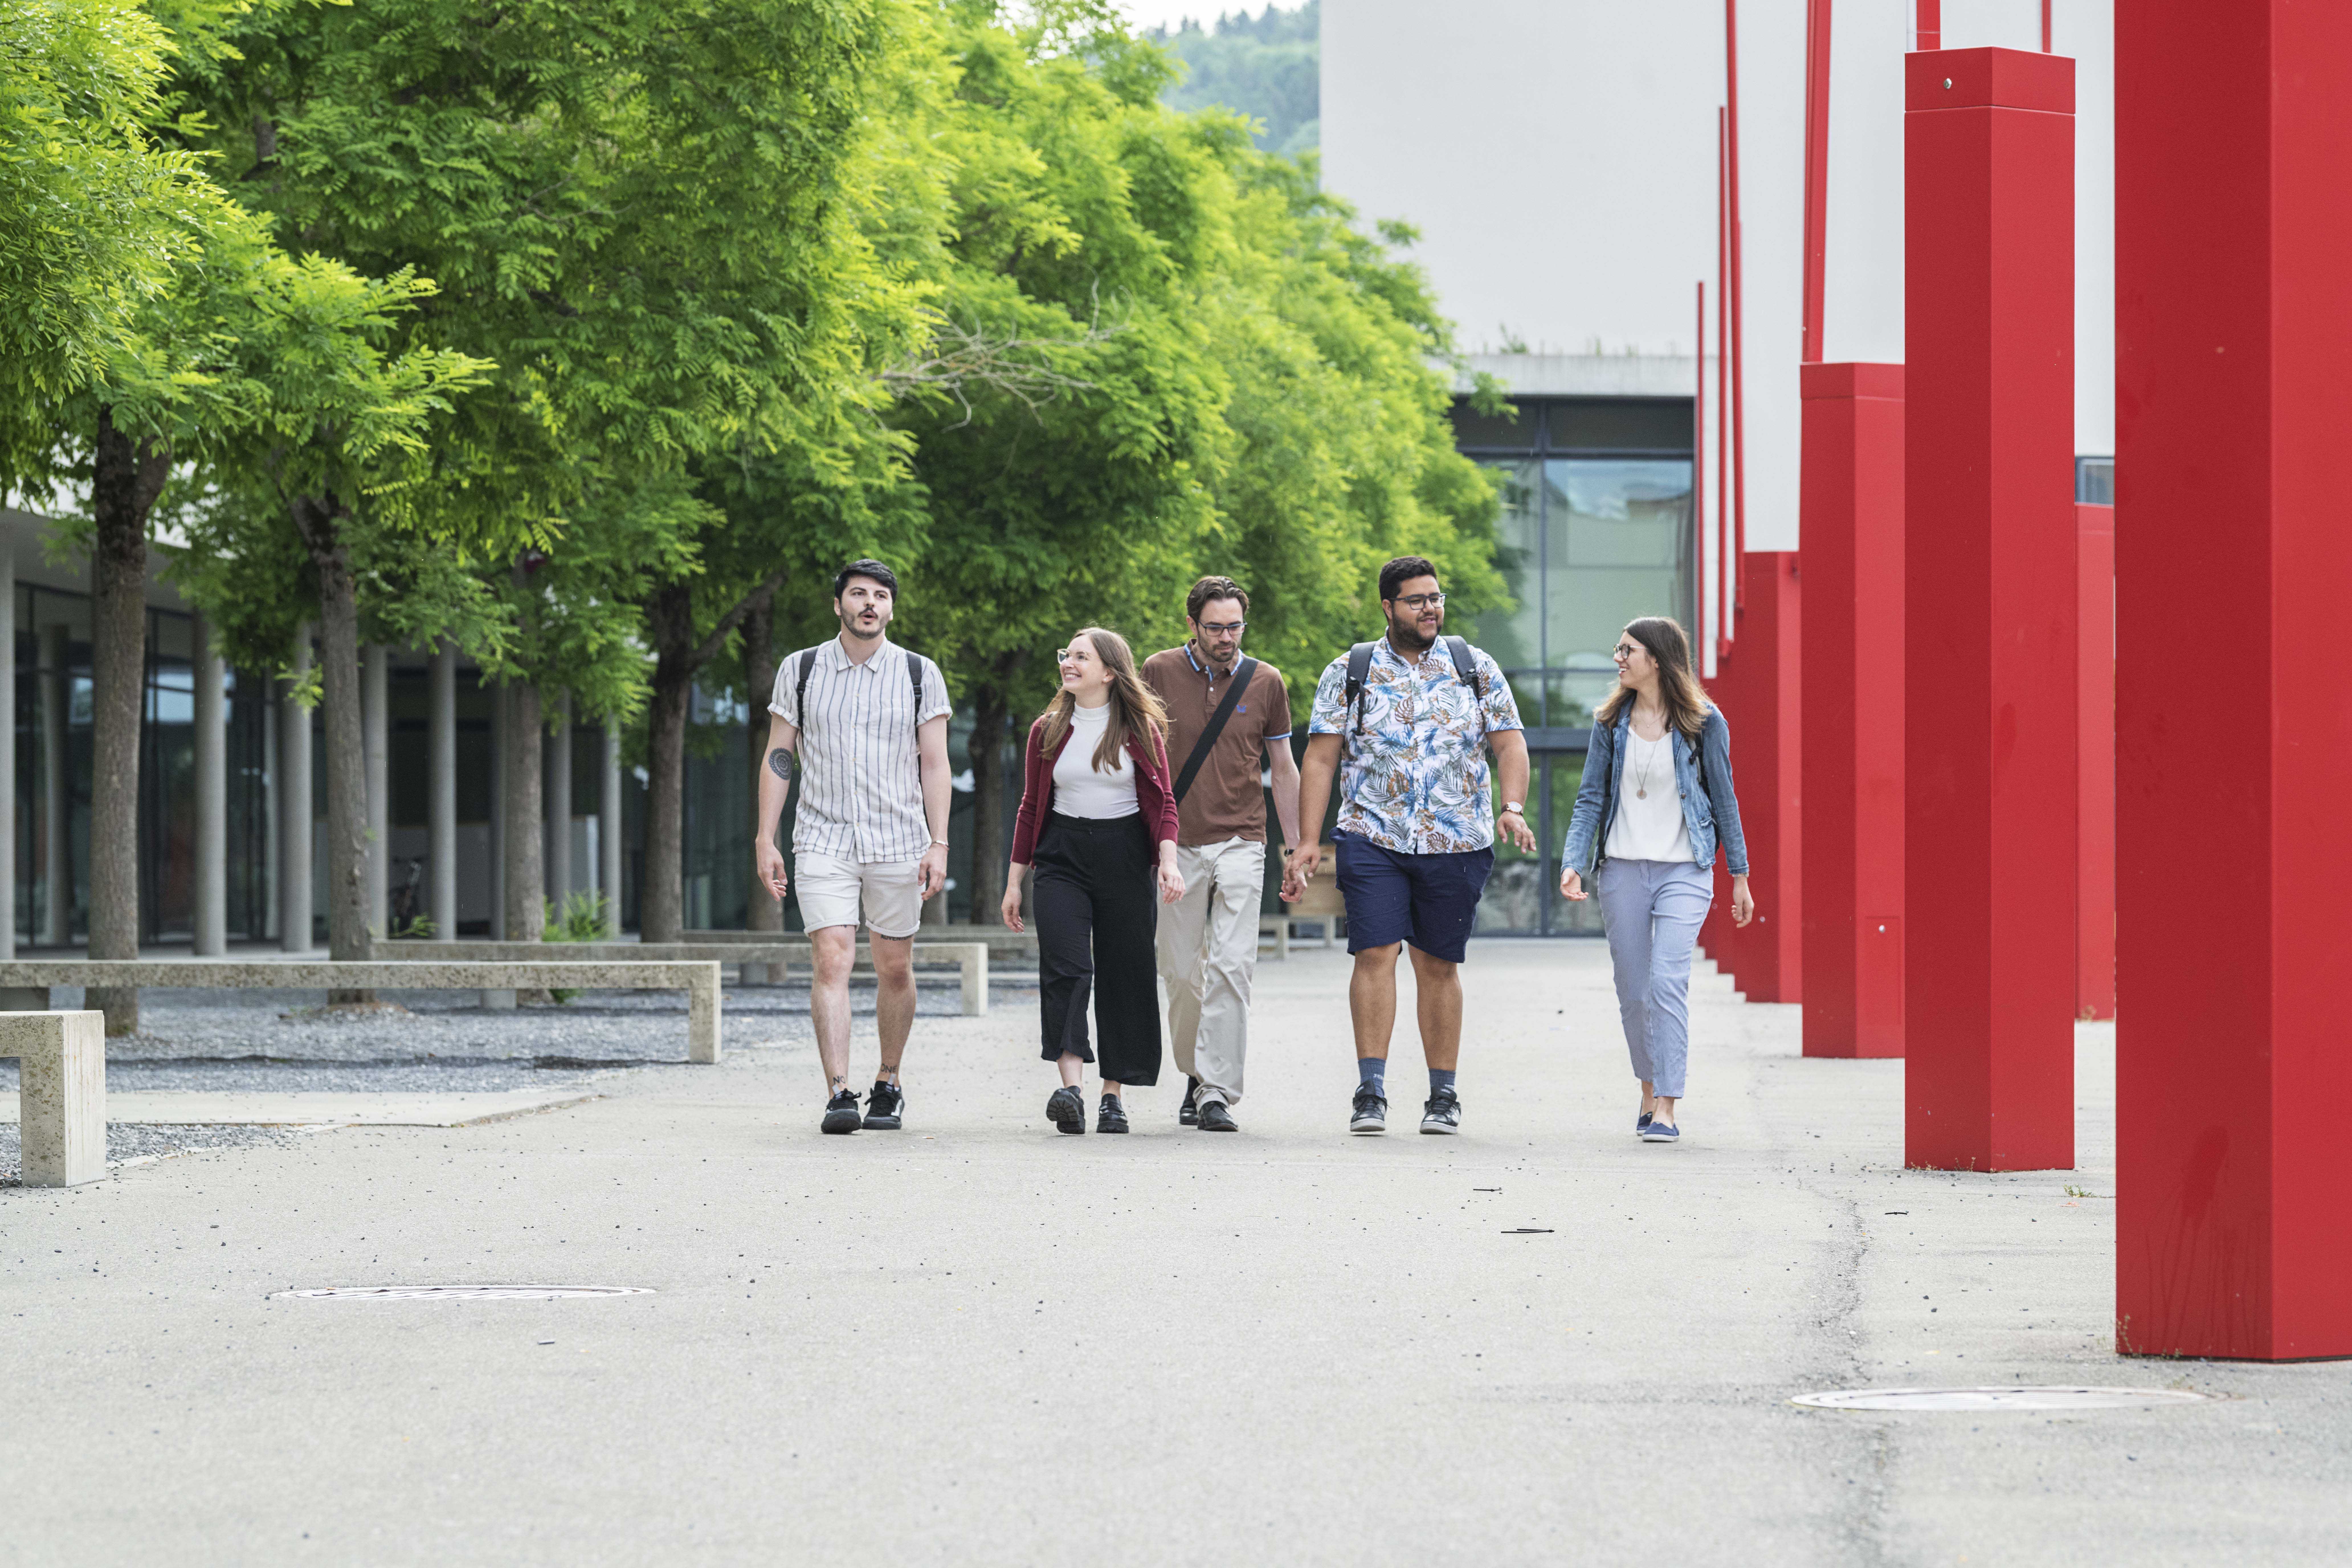 University of Fribourg: Warm welcomes and full support for international students